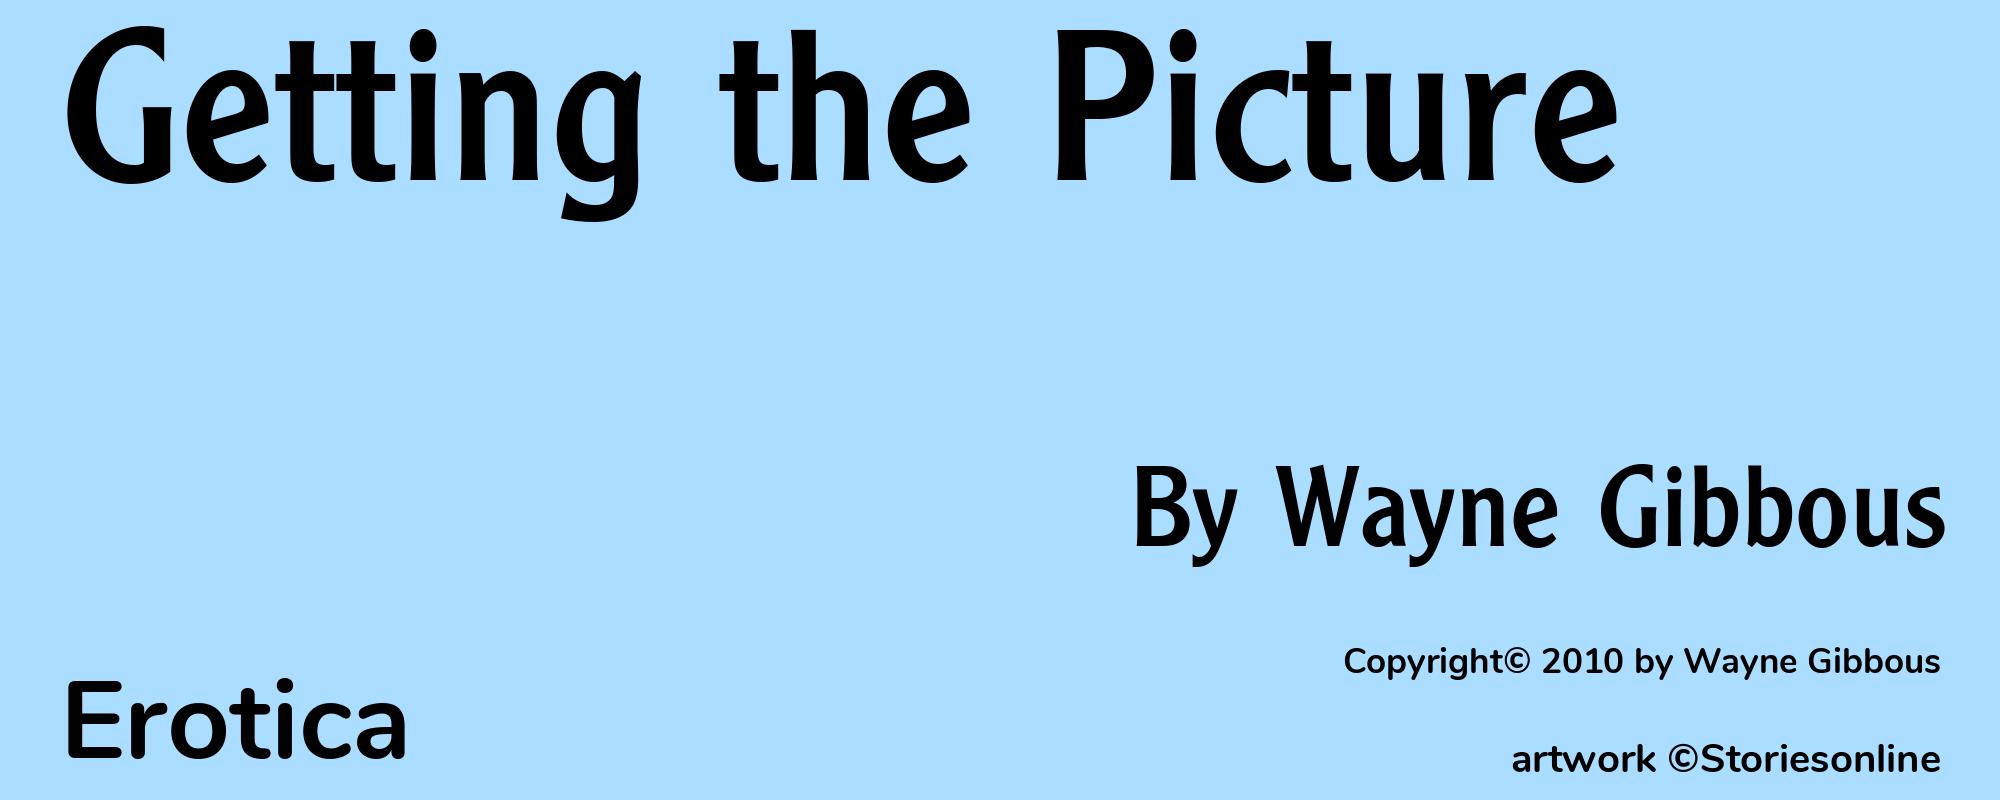 Getting the Picture - Cover